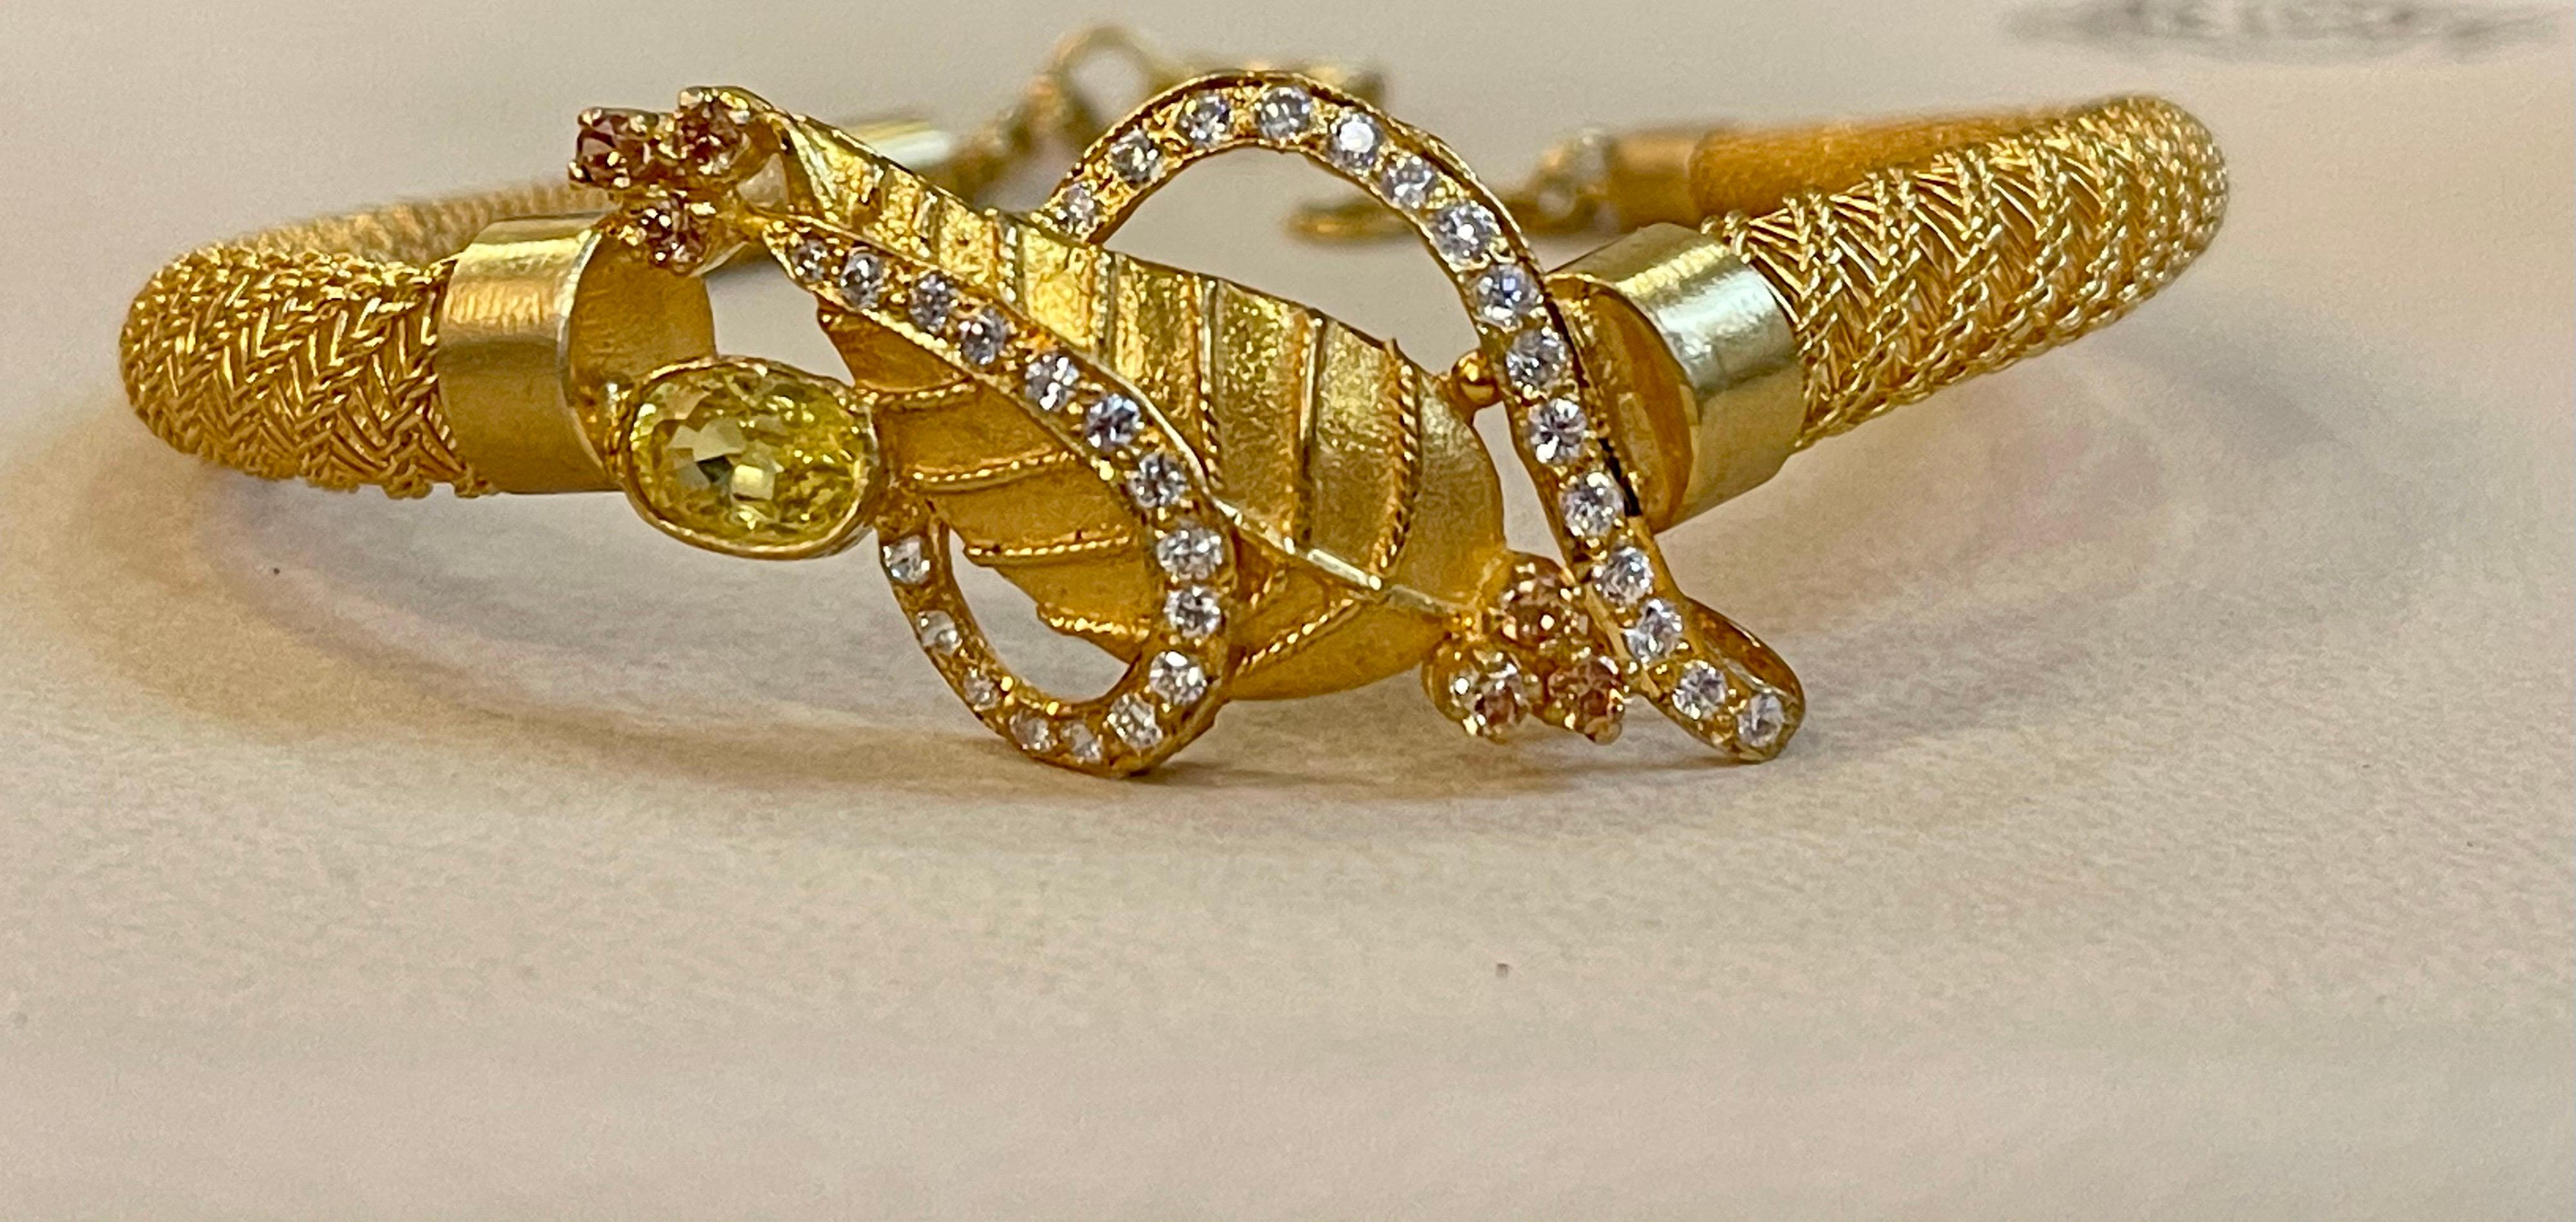 Yellow Sapphire & Diamond Bangle or Bracelet in 22 Karat Yellow Gold 20.8 Grams
It features a bangle style  Bracelet crafted from 22 Karat  Yellow gold and embedded with Oval Yellow Sapphire  weighting approximately 1 Carat
 There are Round diamonds